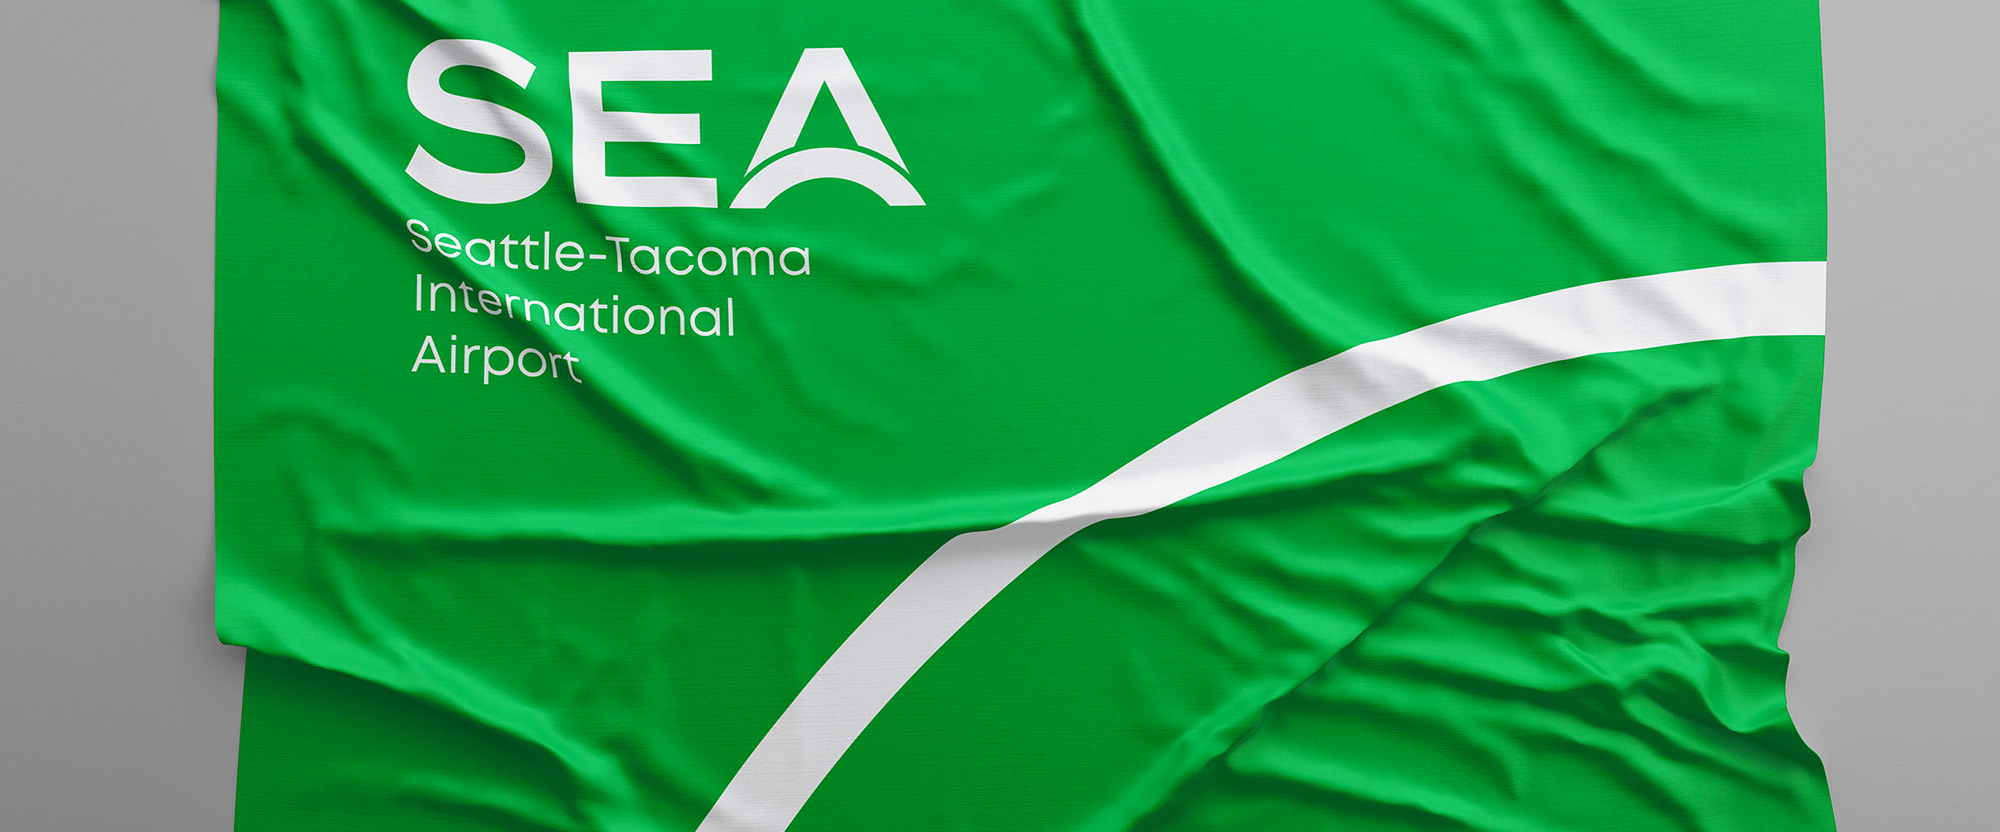 Follow-up: New Logo and Identity for Seattle-Tacoma International Airport by Turnstyle